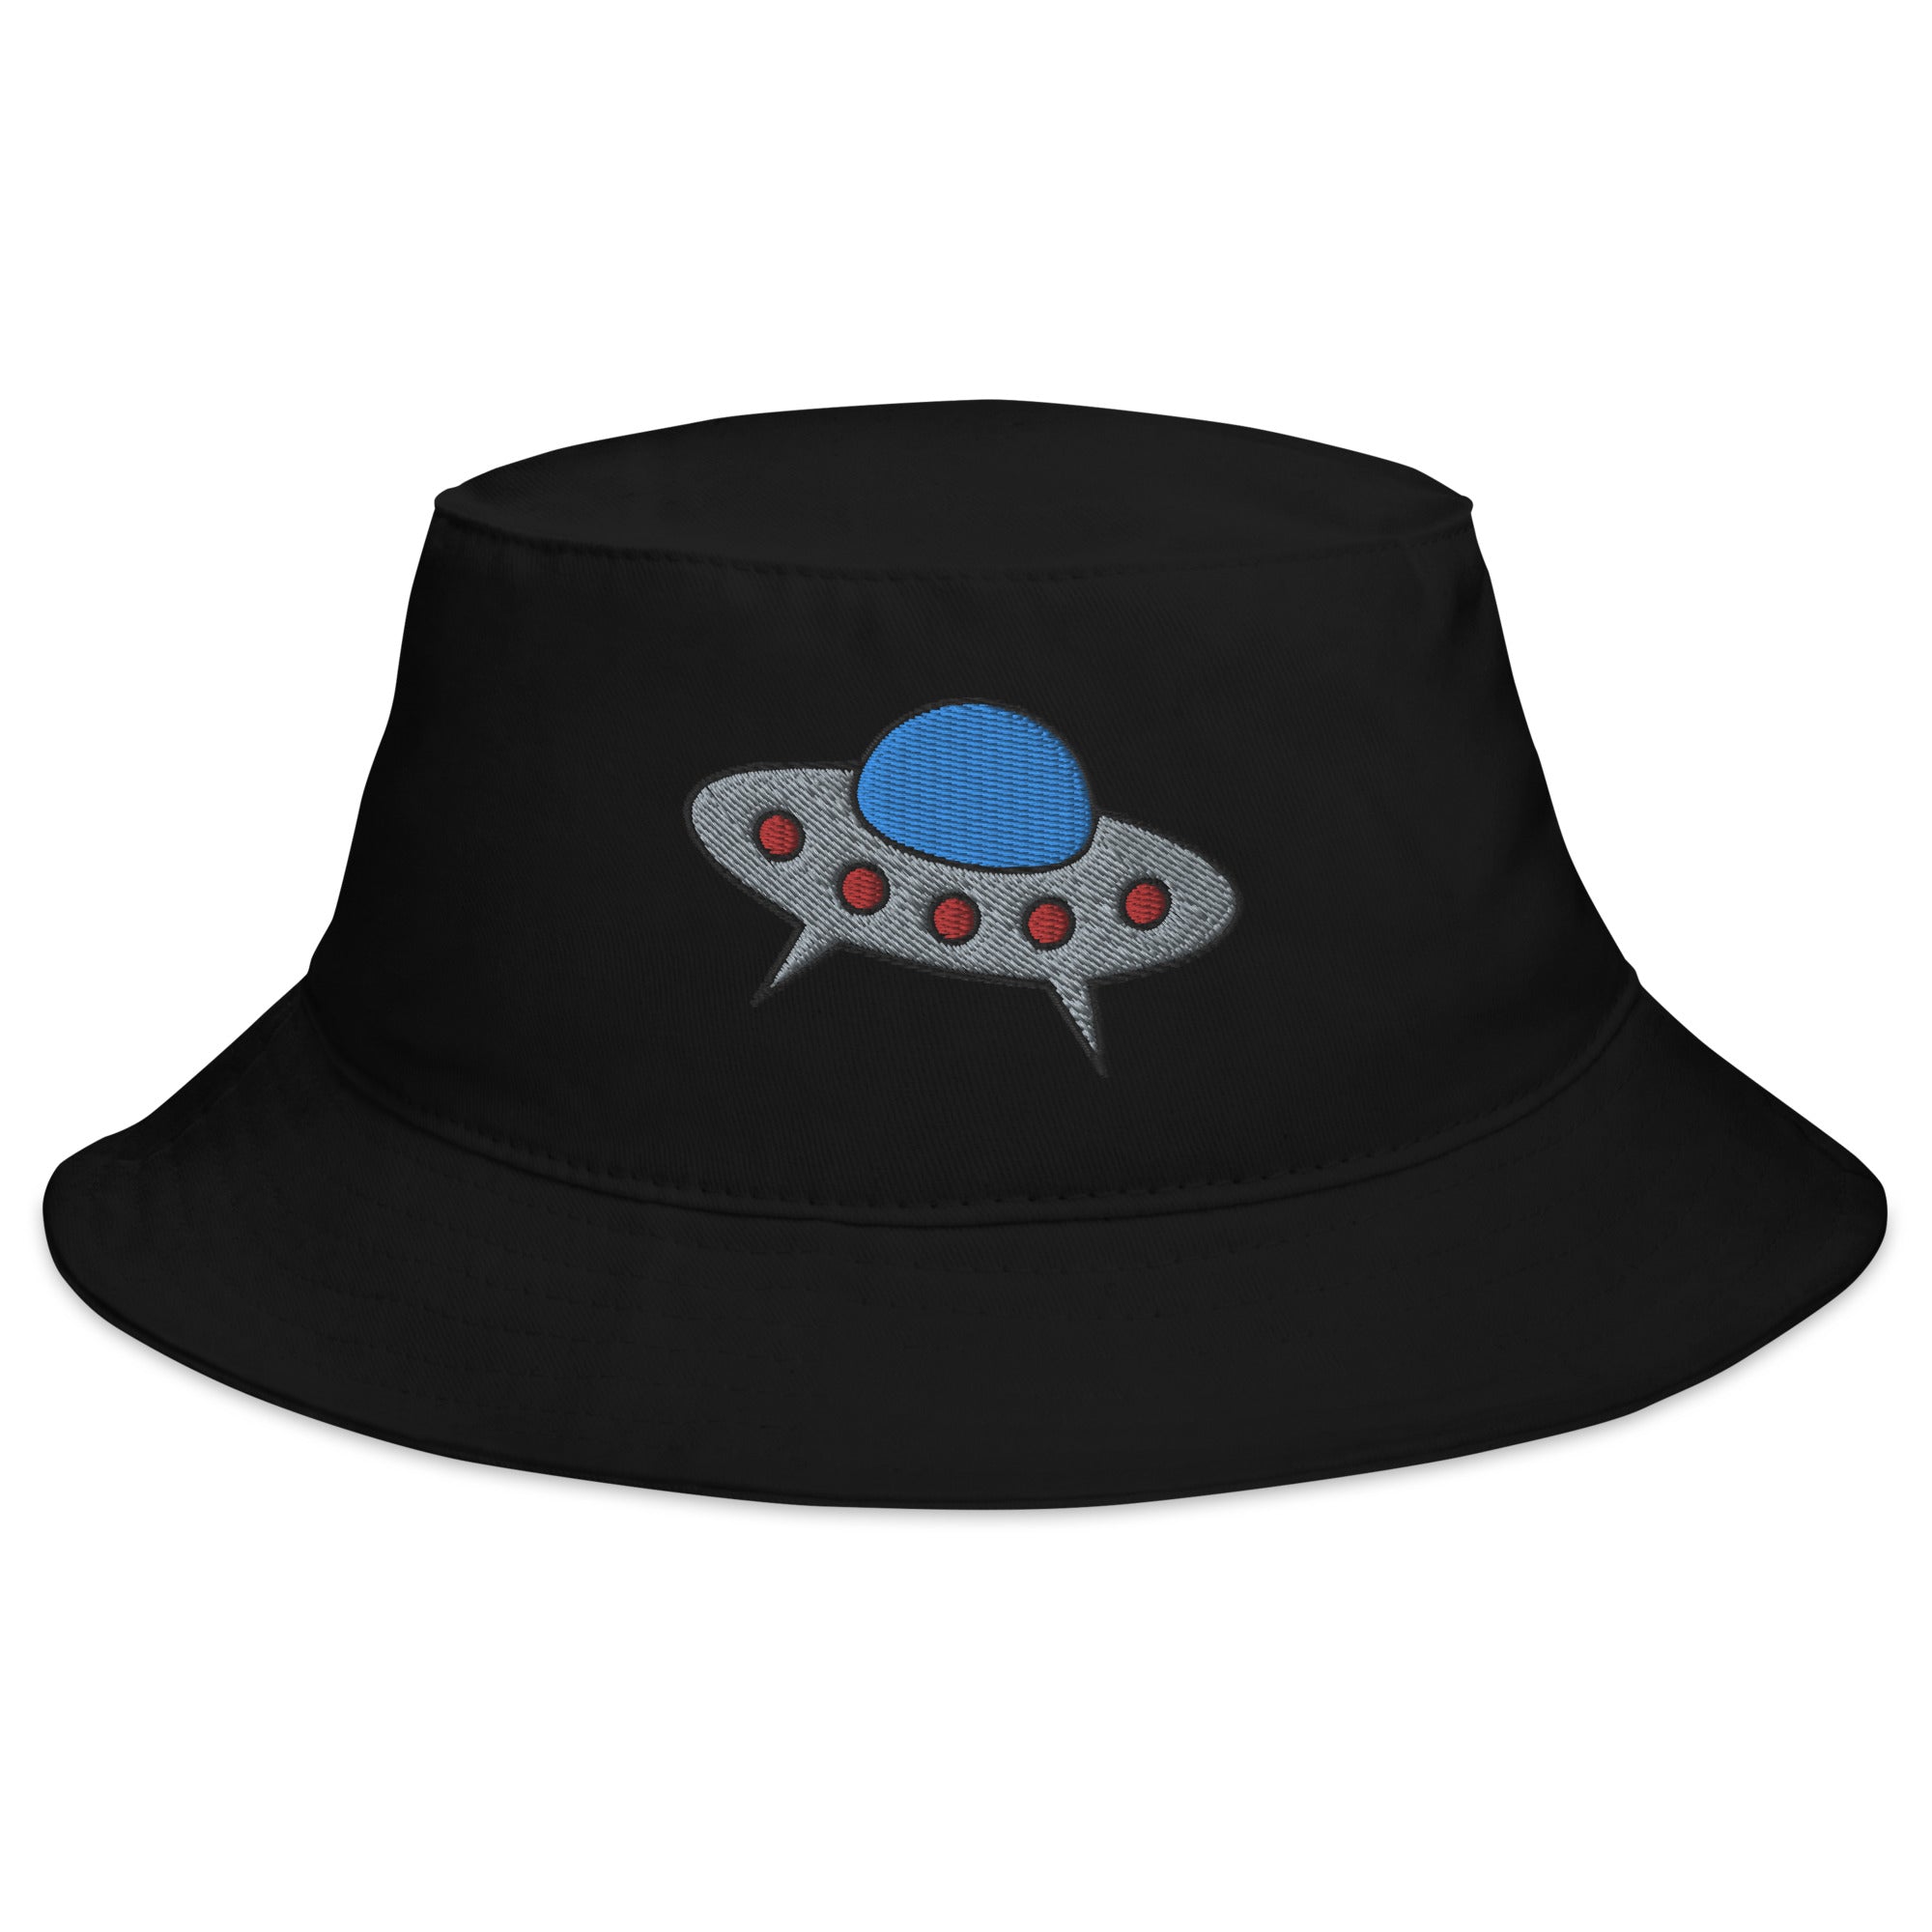 Space Alien Ship UFO Flying Saucer Embroidered Bucket Hat